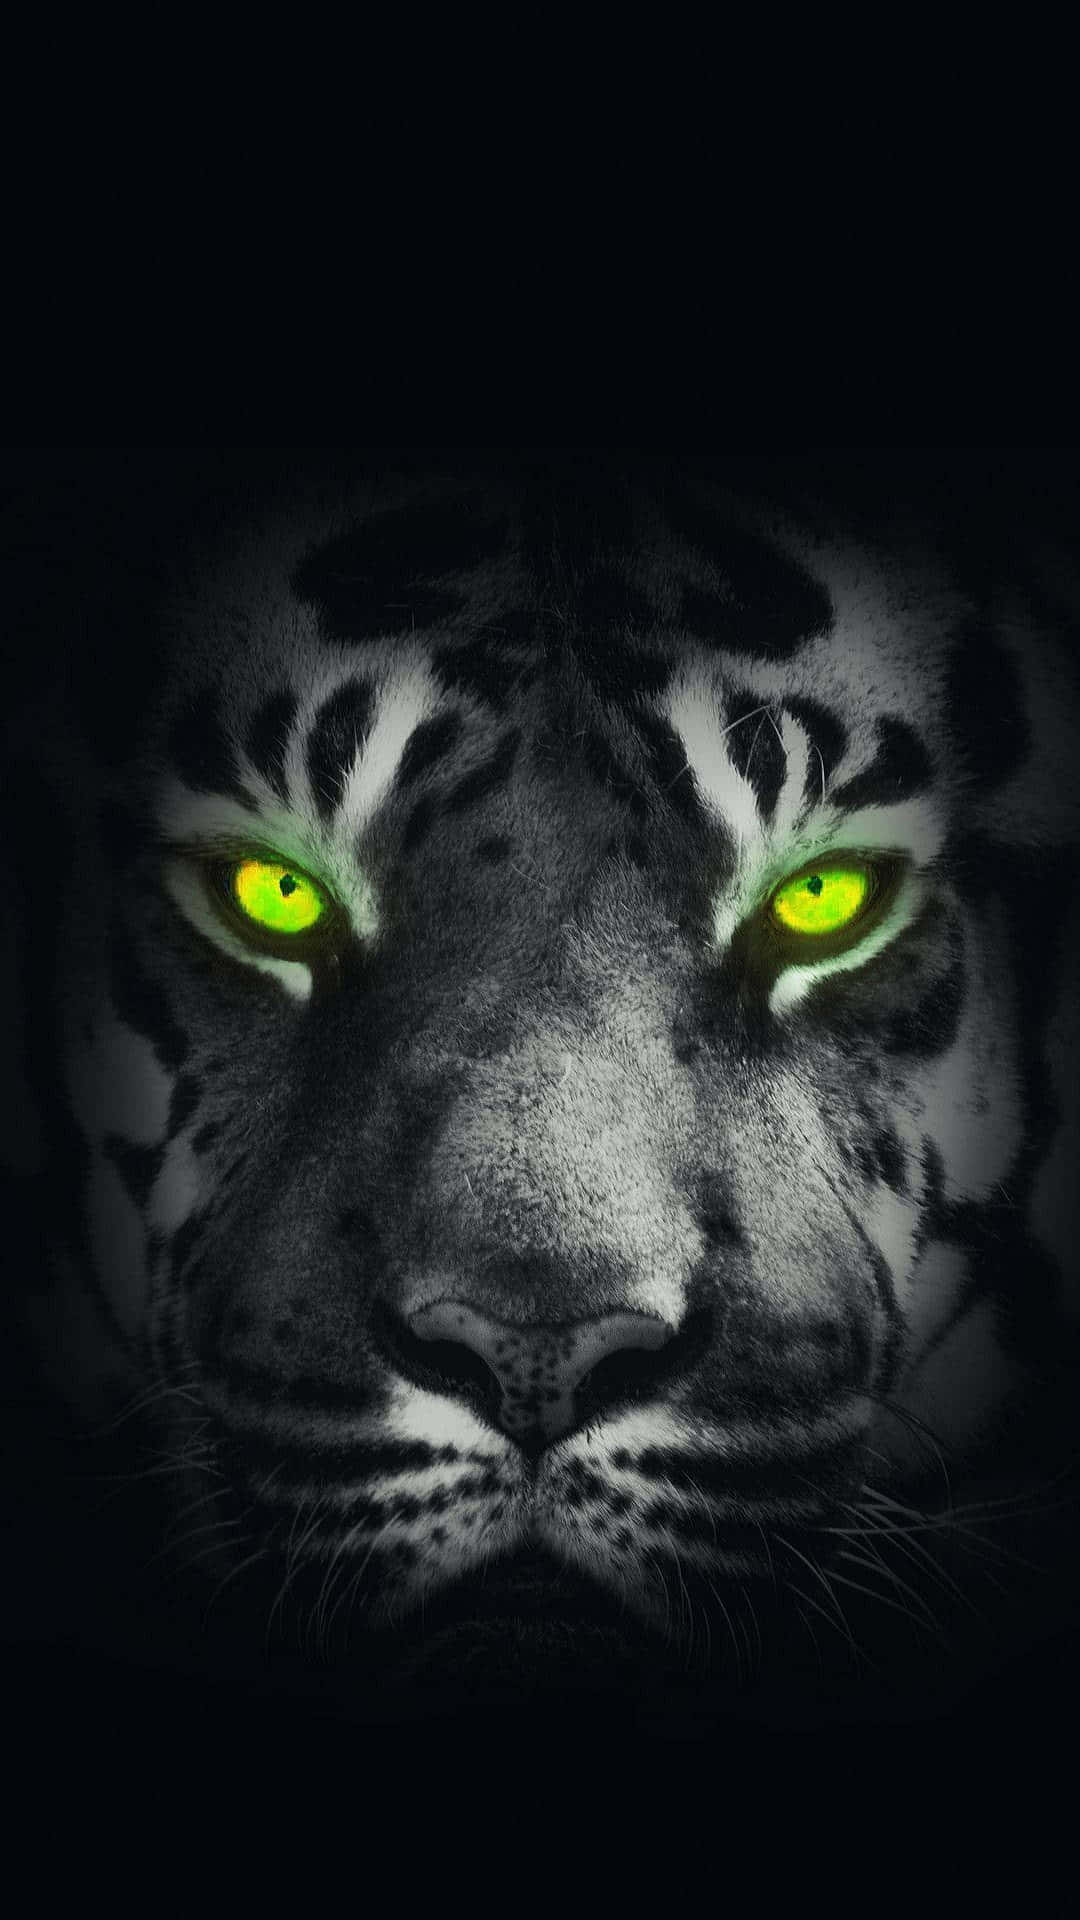 Tiger Face With Green Eyes Background